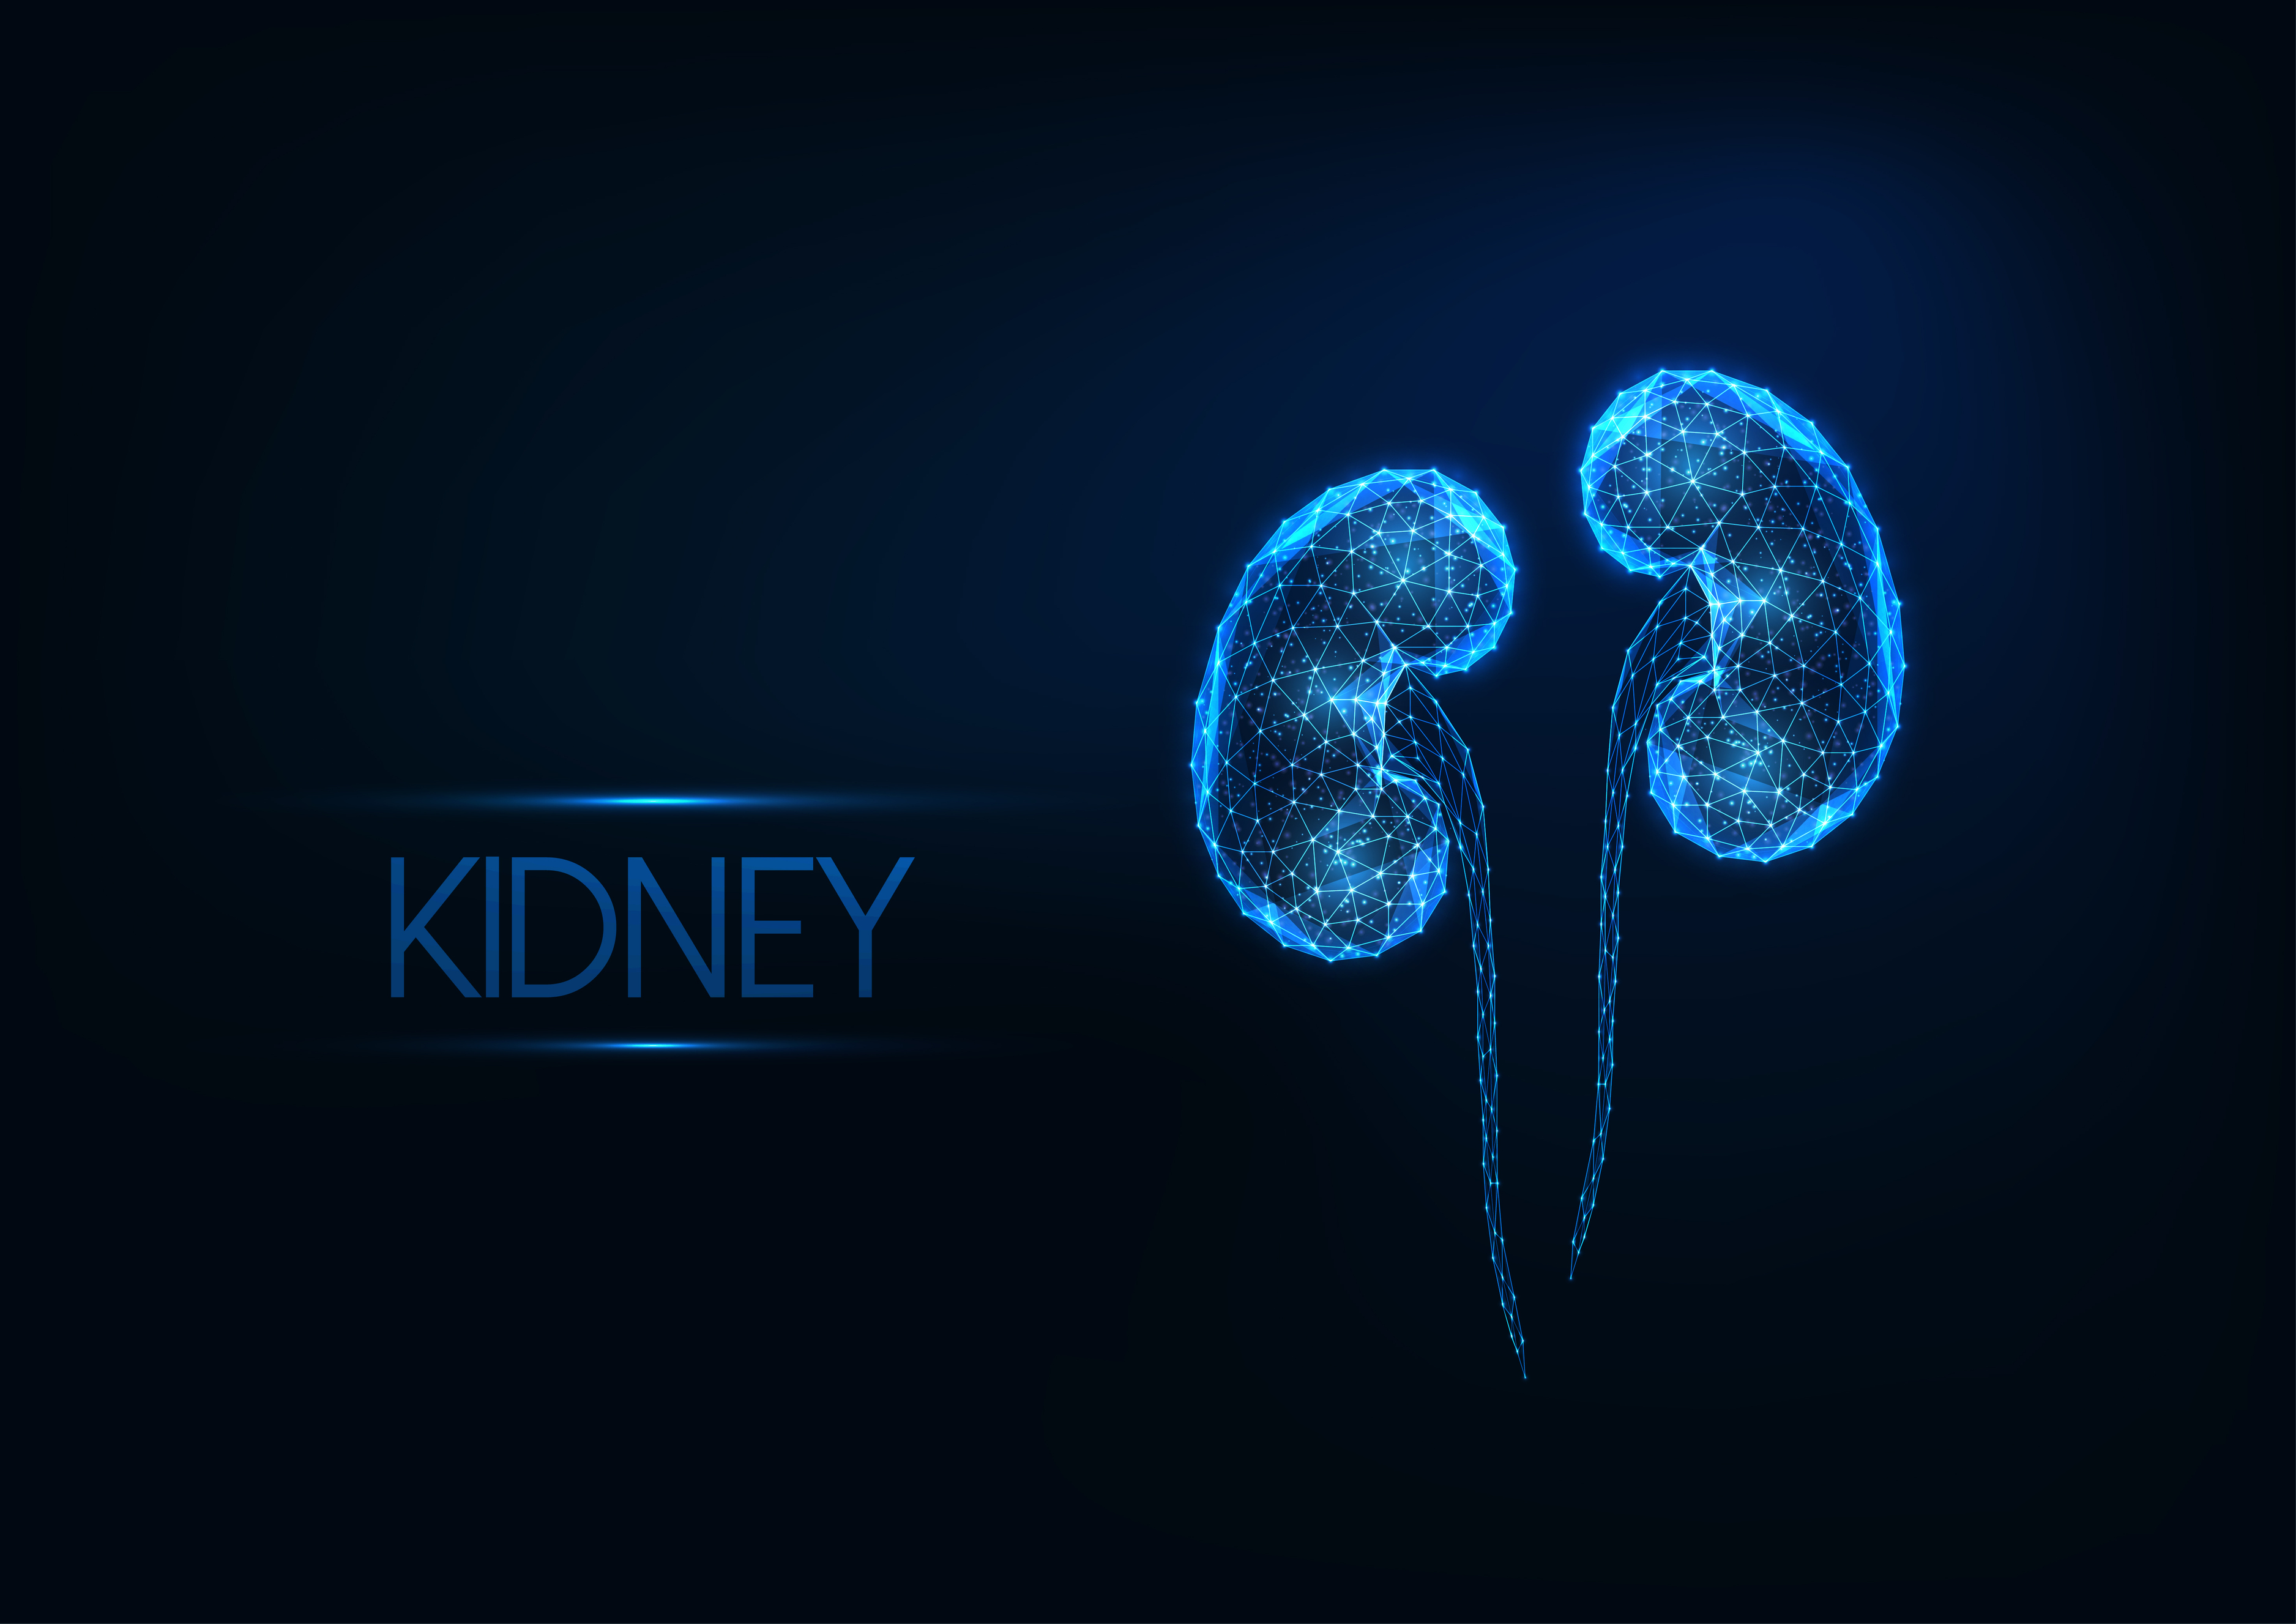 Kidney Tumours - The Facts